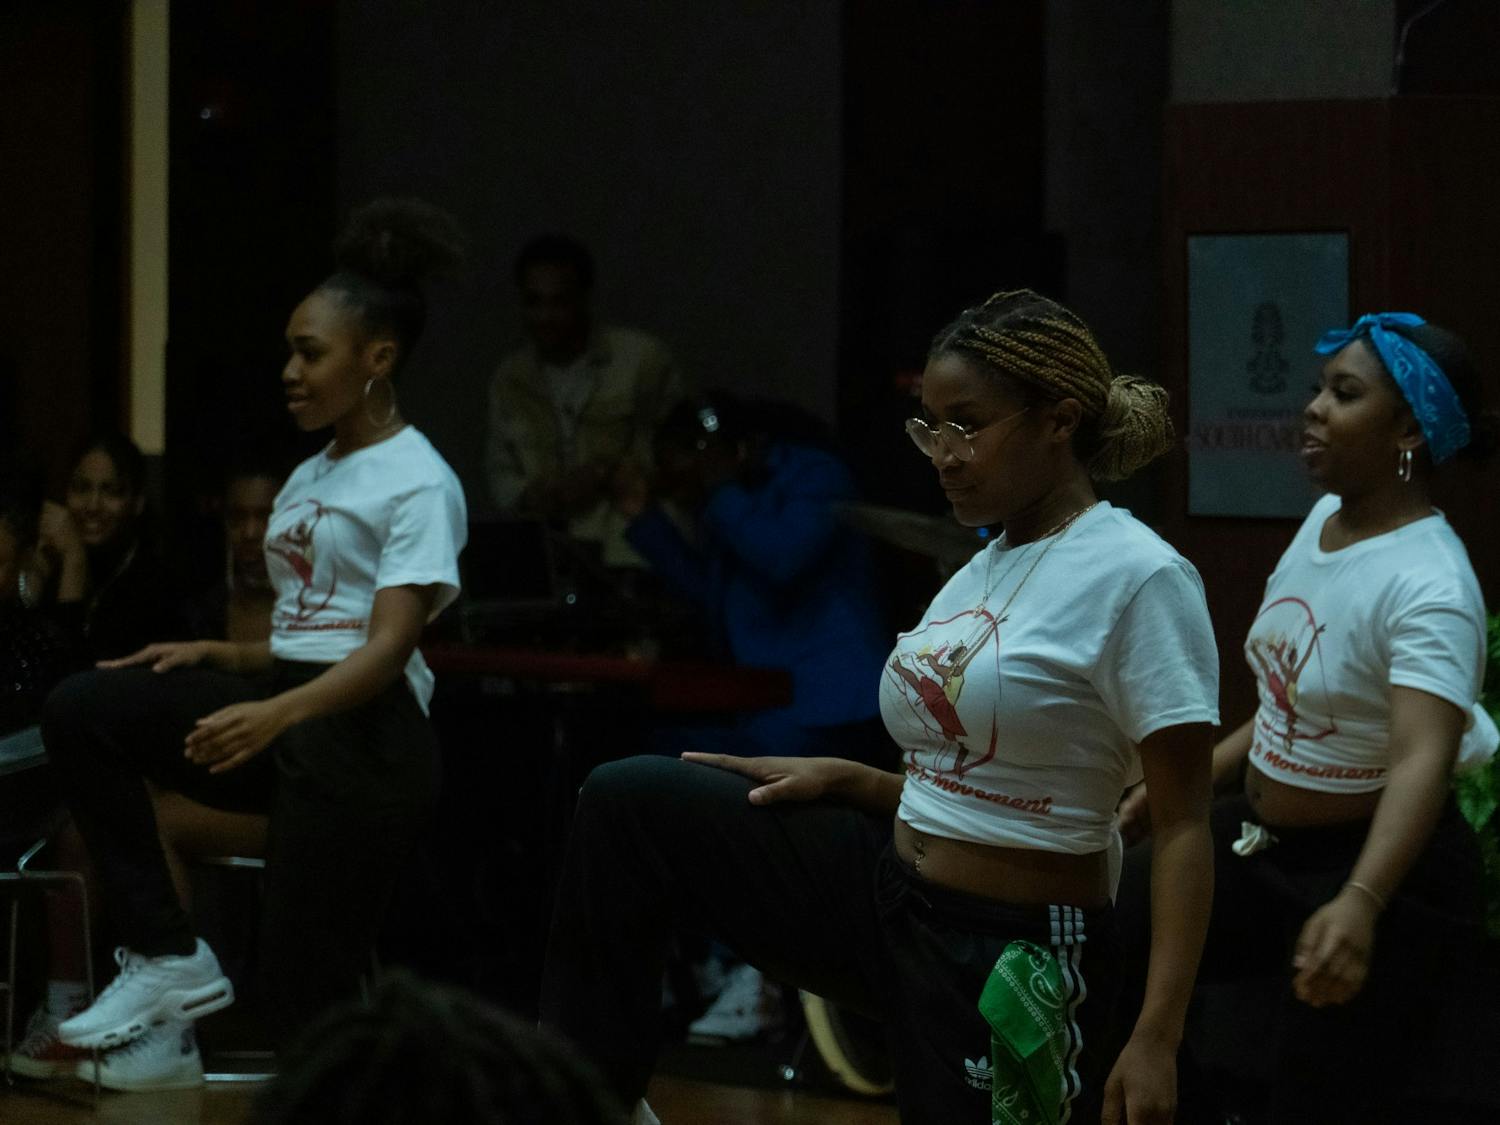 Dance group Melanin Movement performs a choreographed step routine during the talent showcase at Back II Black on Feb. 25, 2022. The Back II Black talent showcase included a variety of performances including original songs, dancing, and spoken word poetry. 